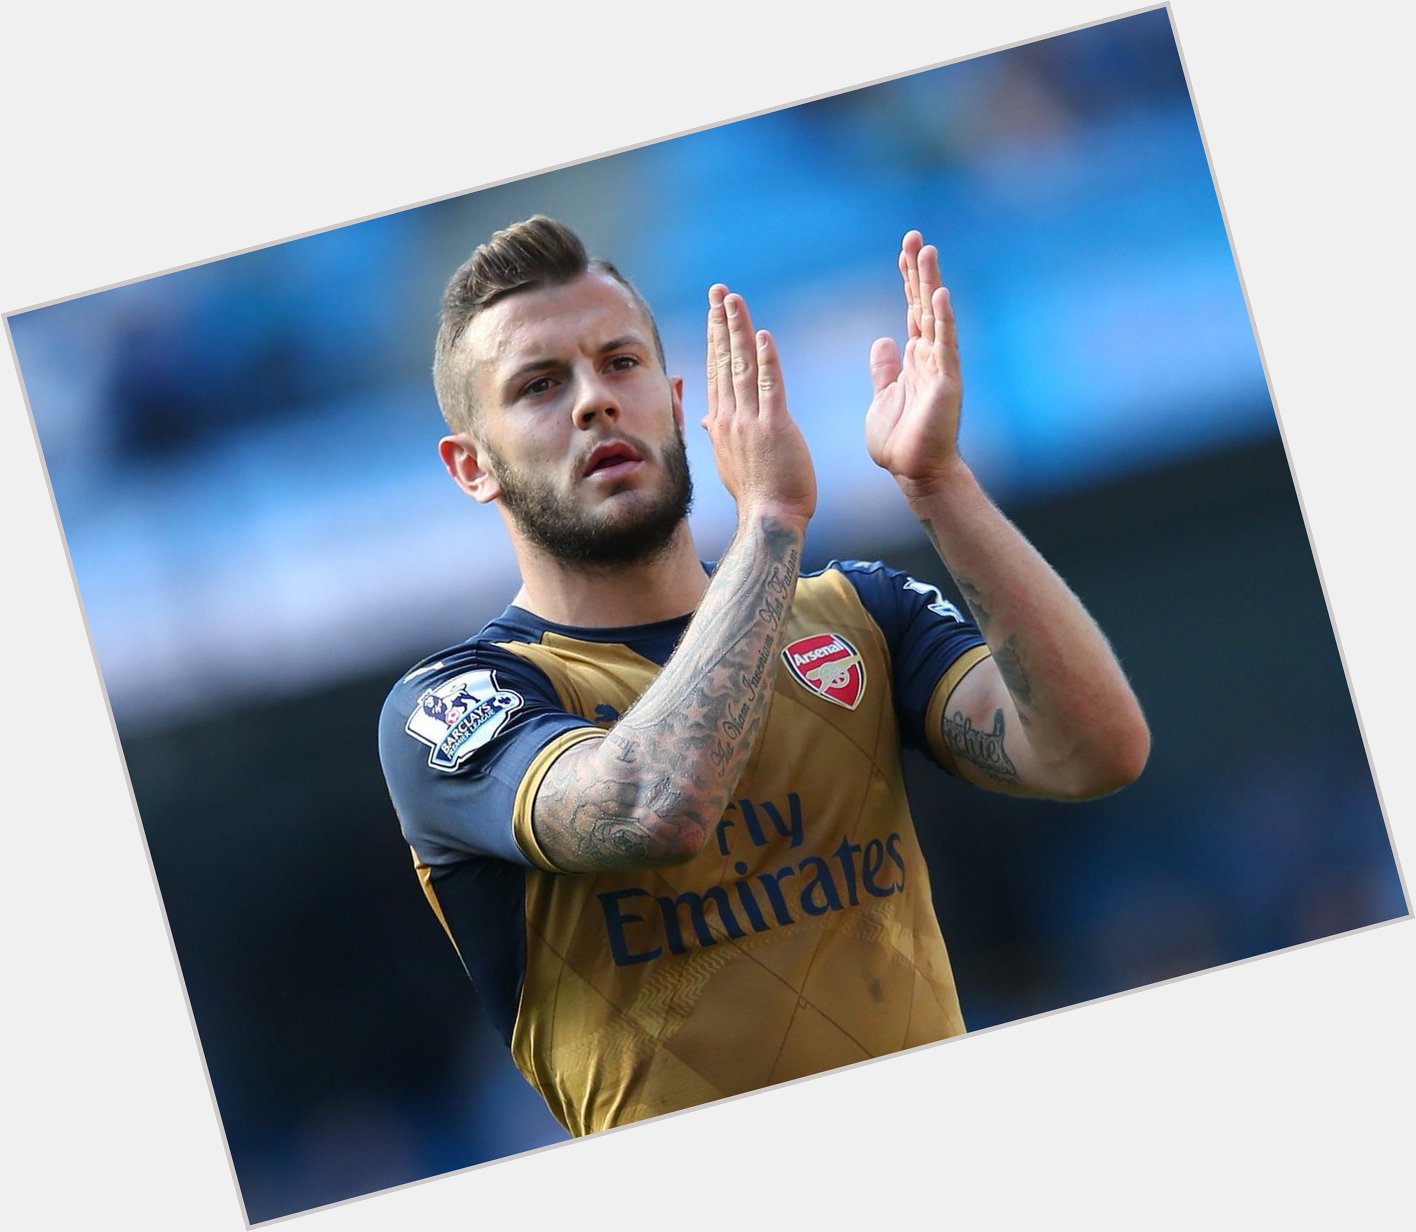 A special happy birthday to former Arsenal midfielder Jack Wilshere, who turns 31 today. 